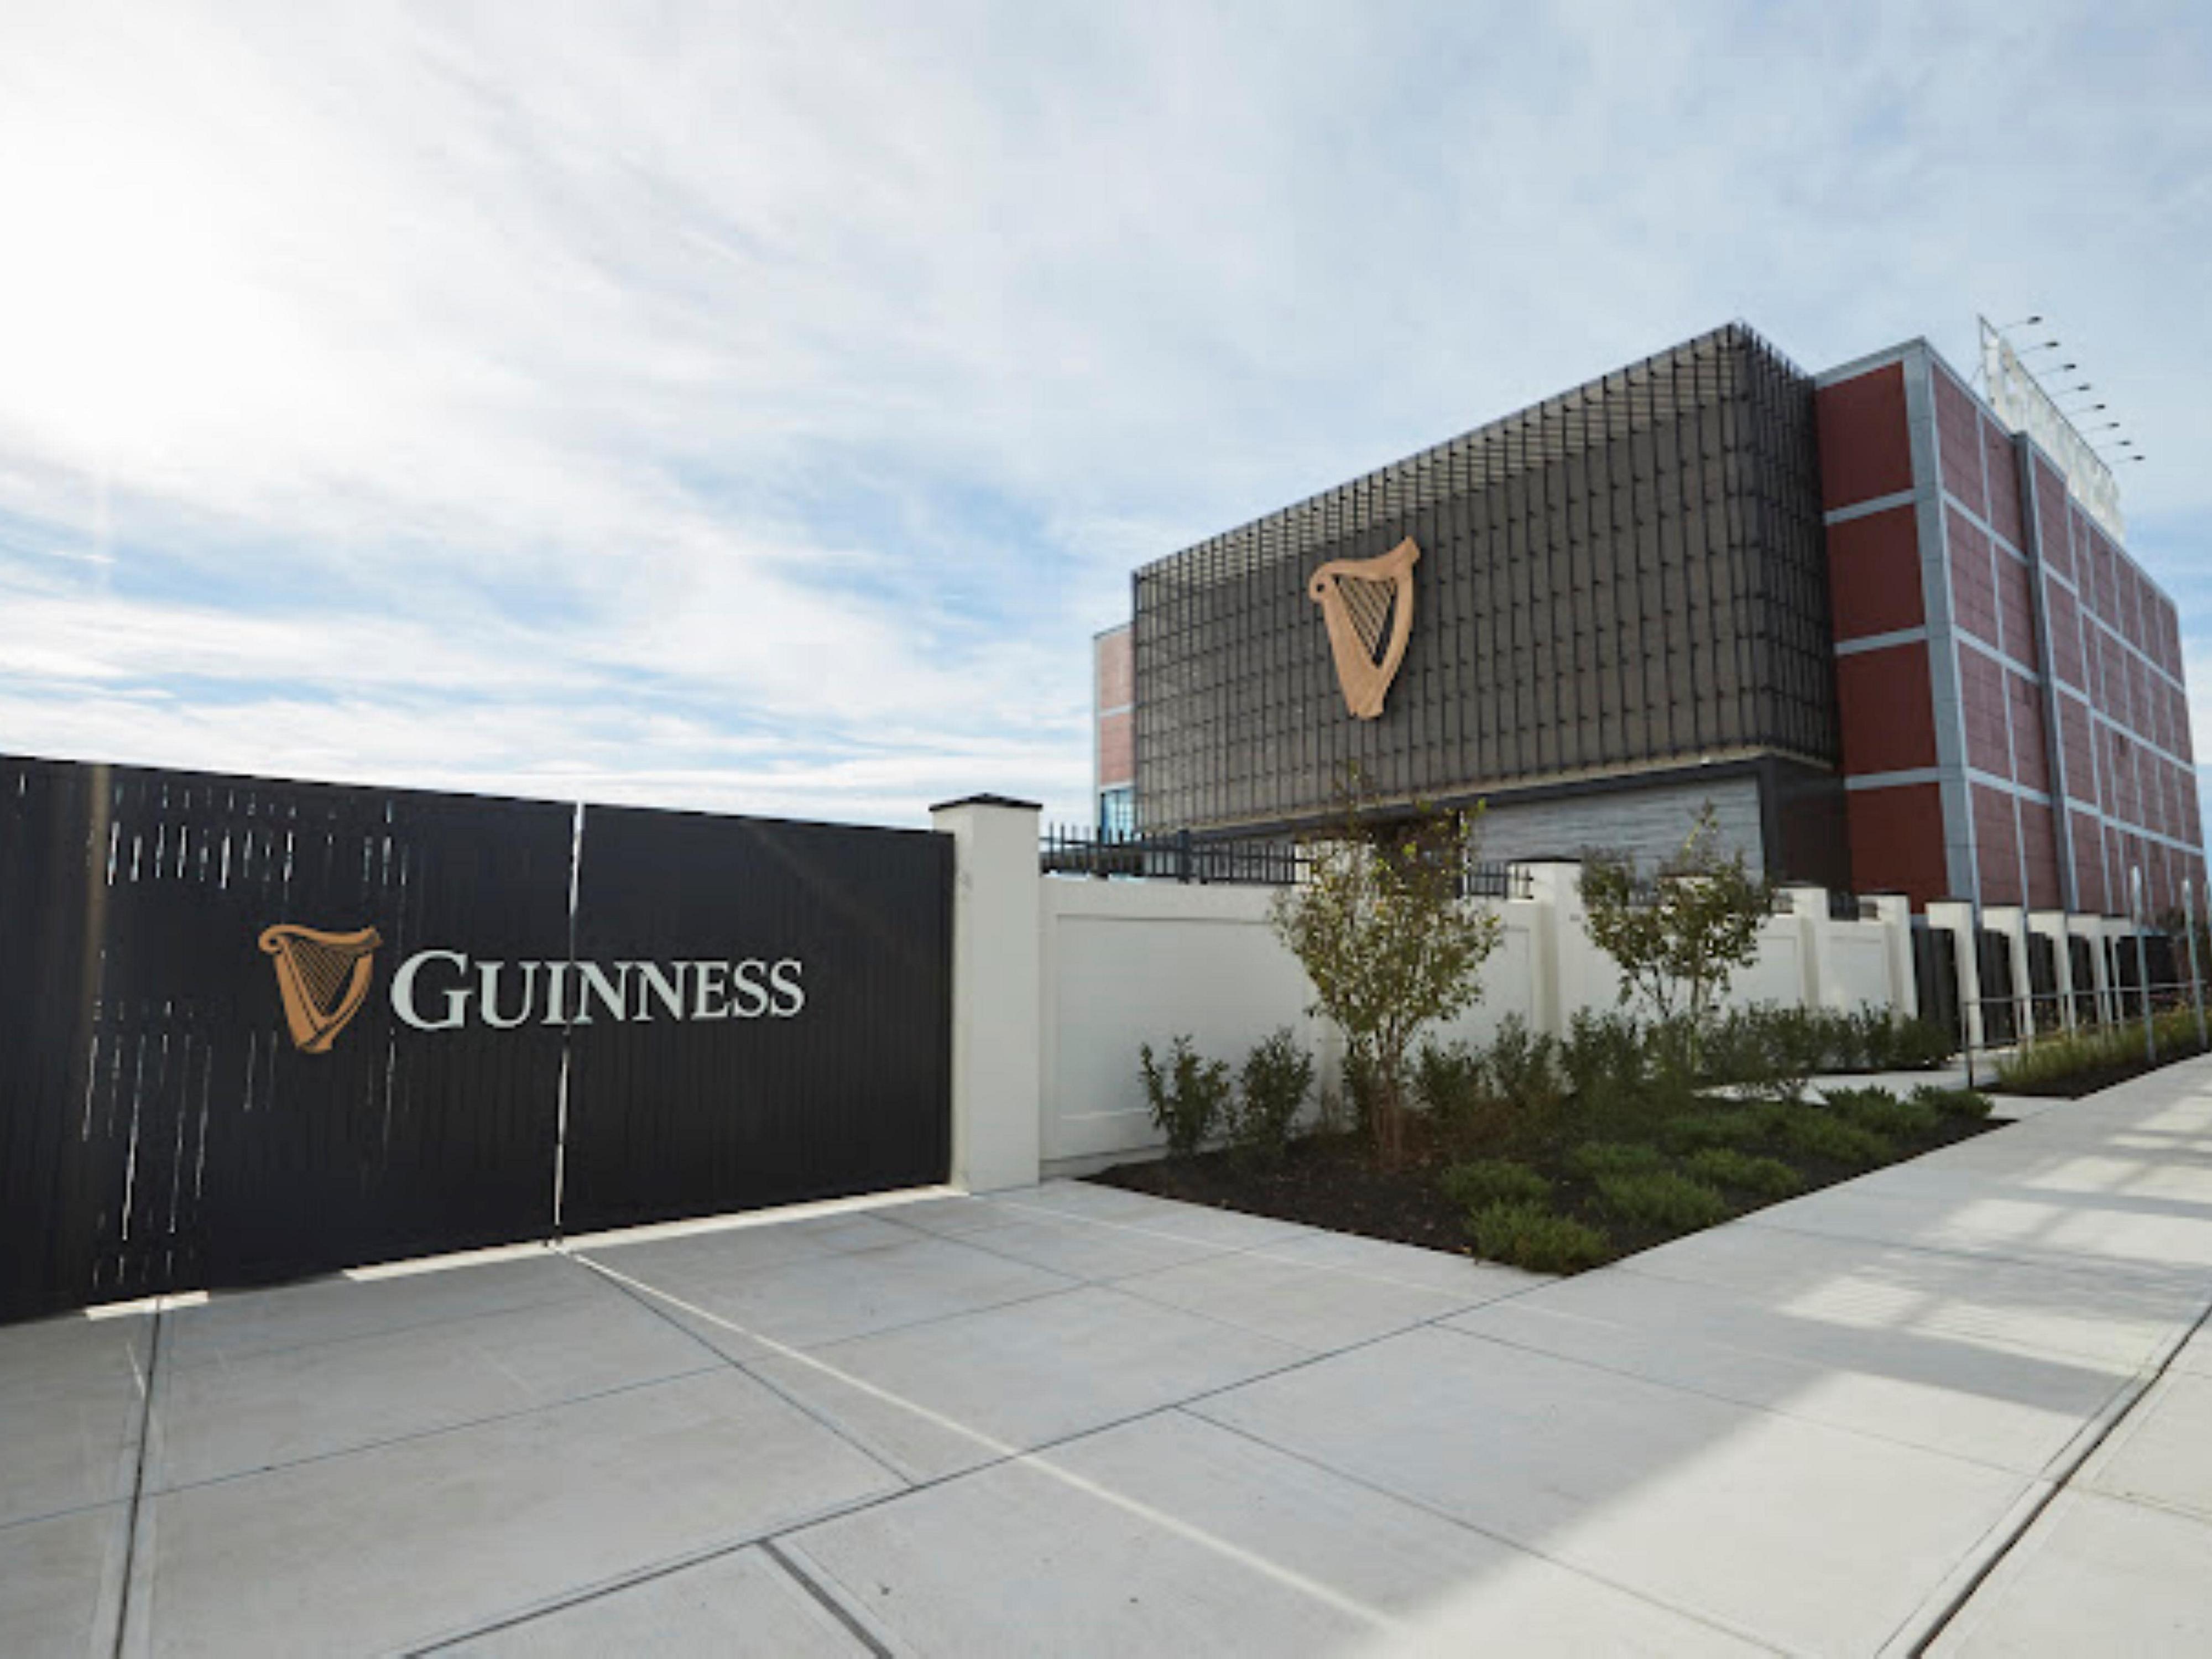 Guinness Open Gate Brewery is just a short drive away.